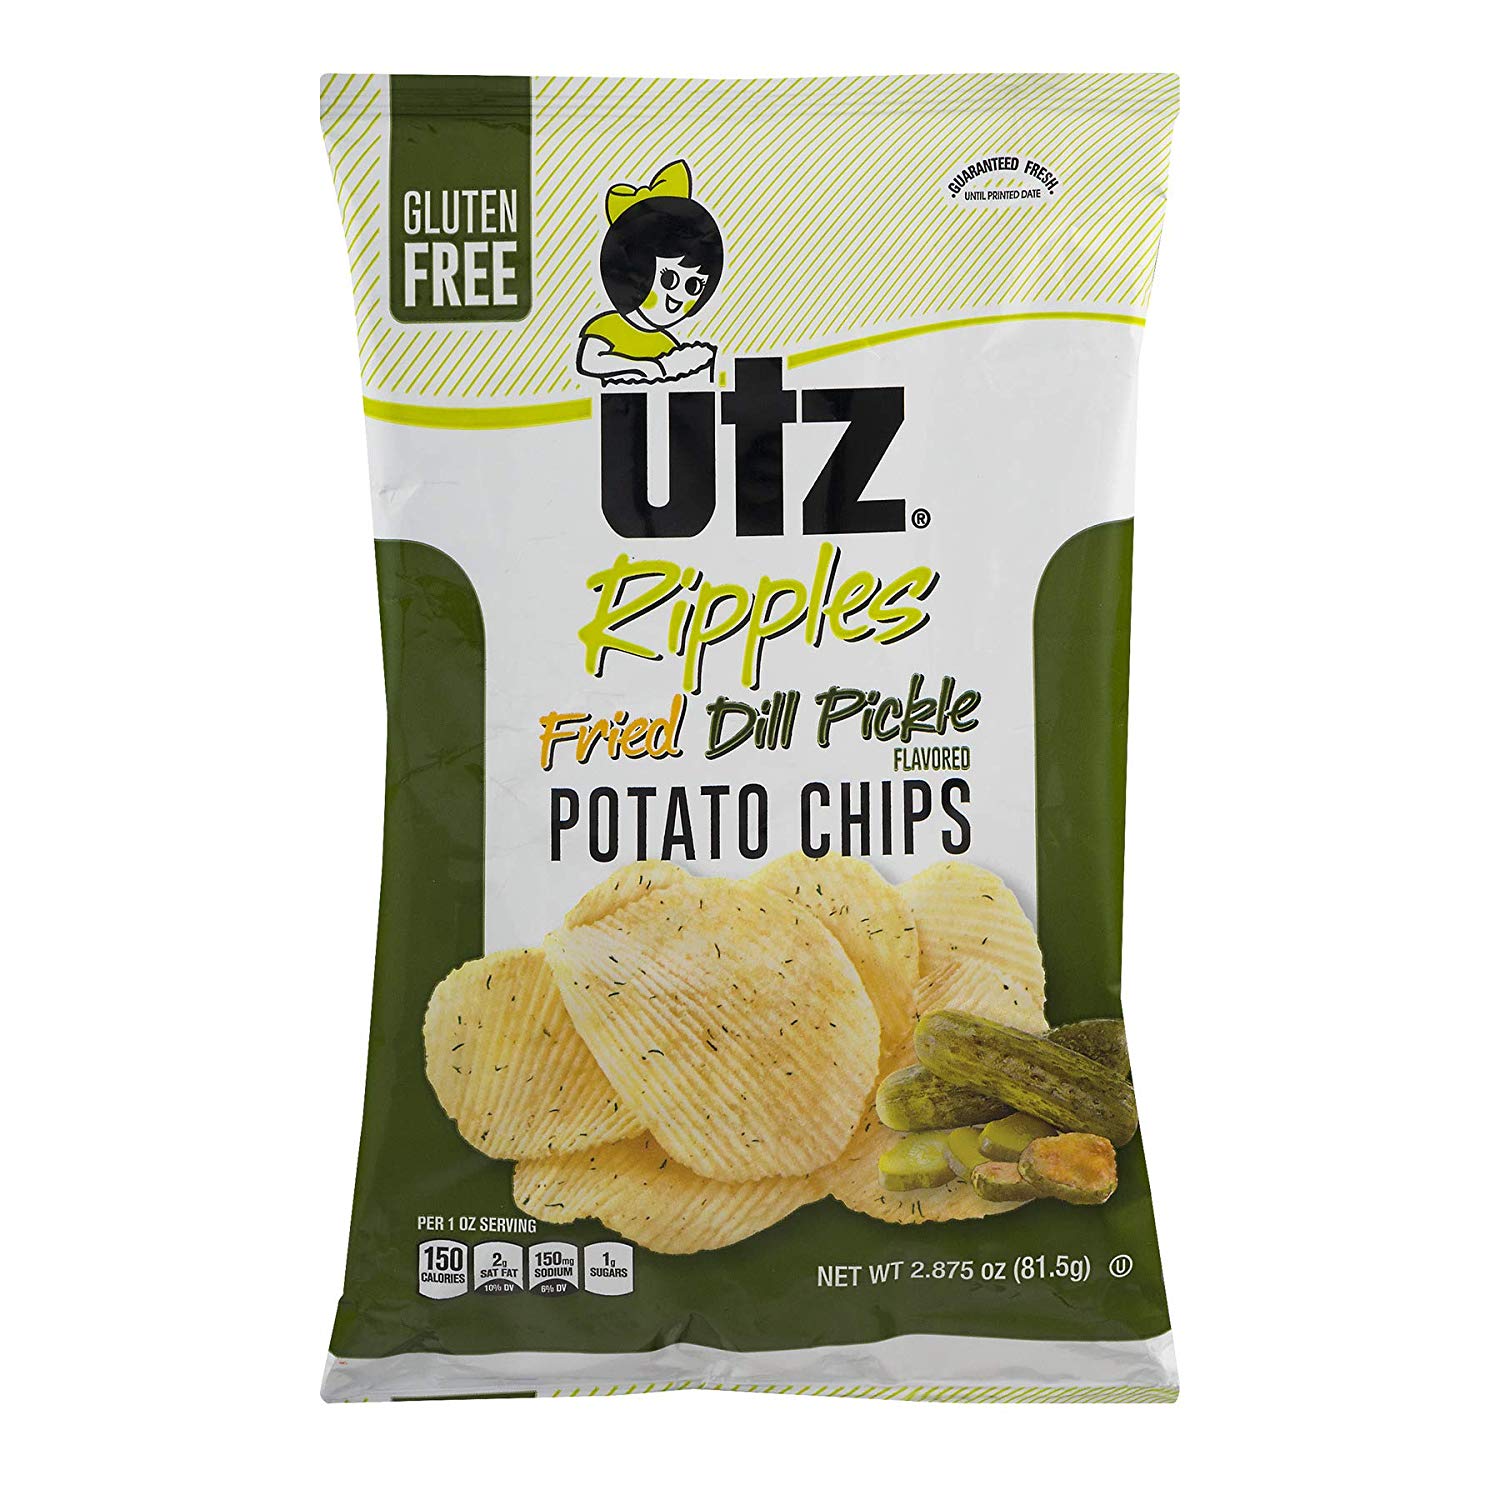 UTZ Ripples Fried Dill Pickle Potato Chips